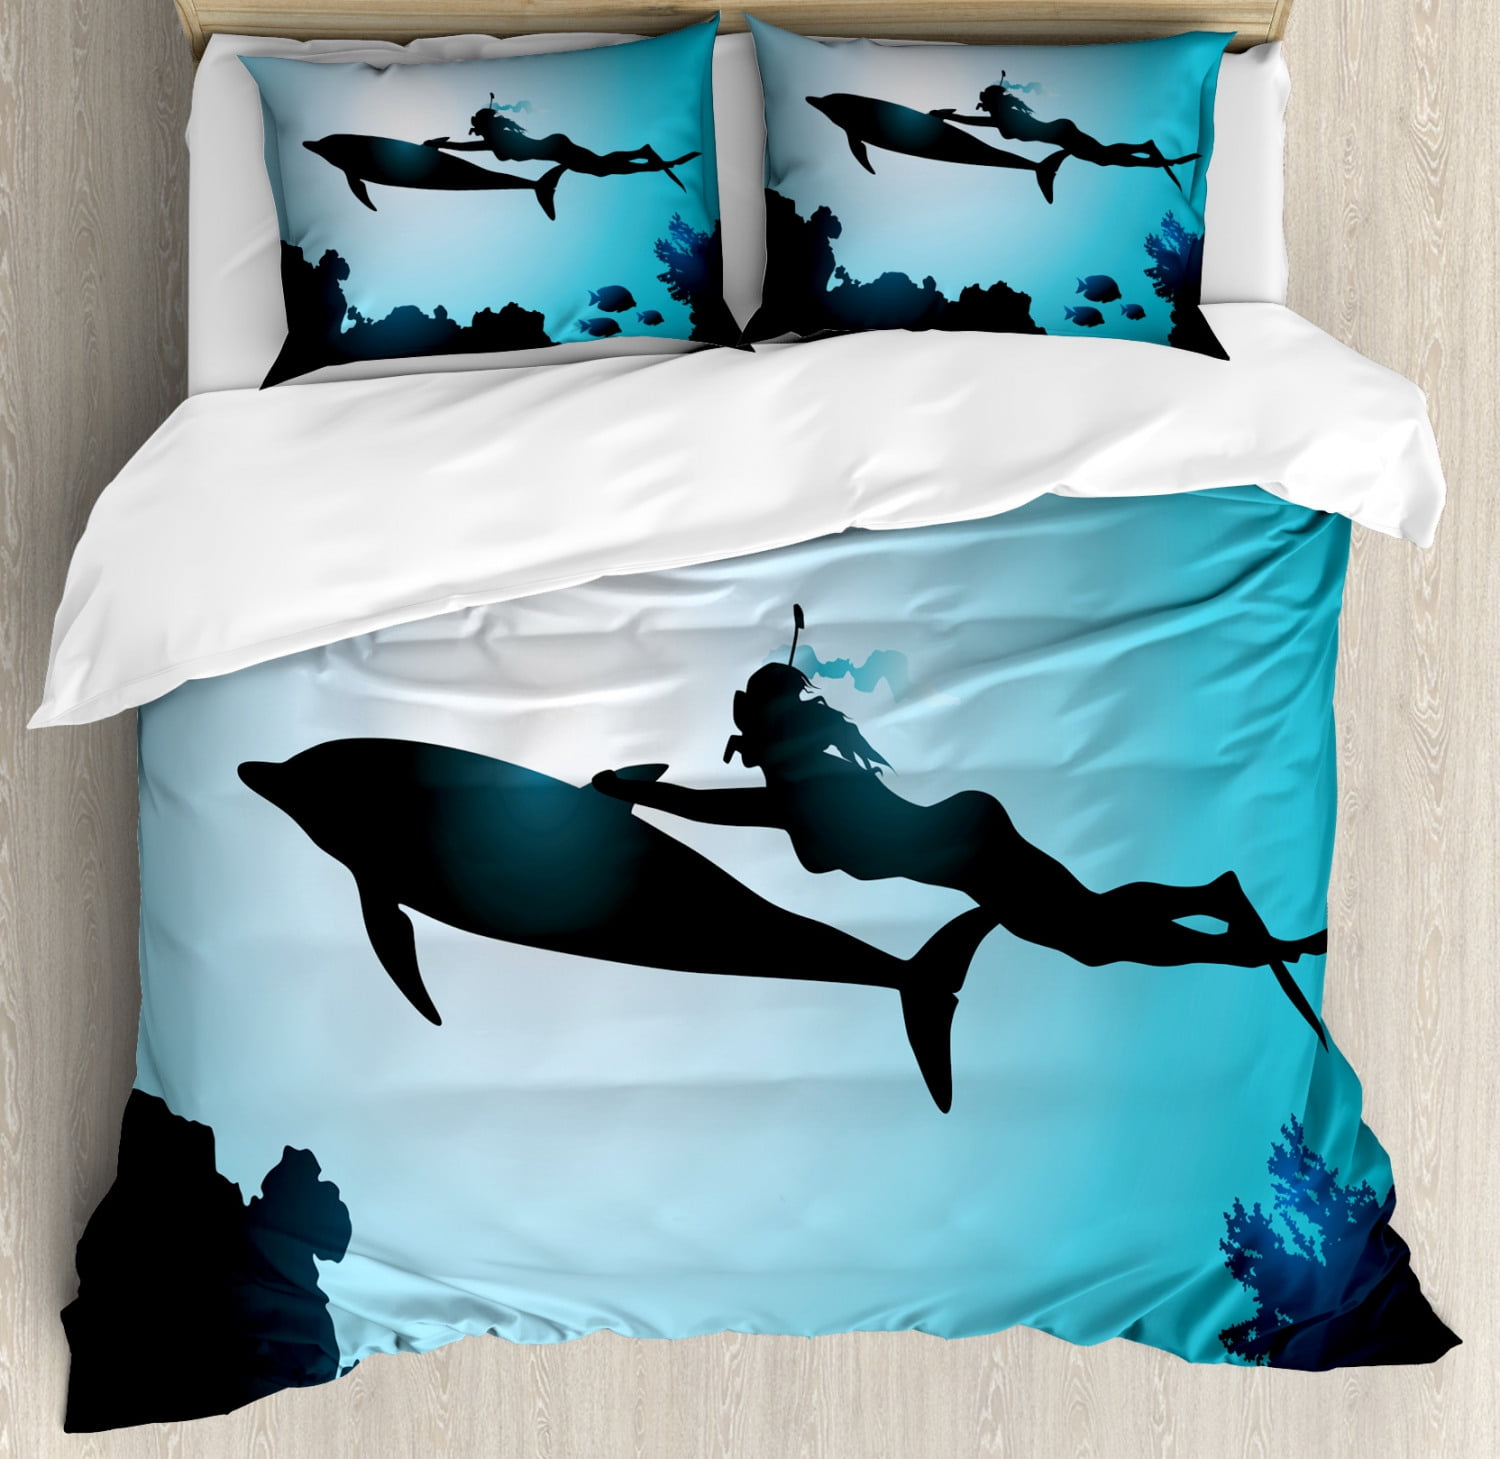 SINGLEKids Duvet Covers Blue Sea Life Dolphins Sharks Whales  Cover Bedding Sets 